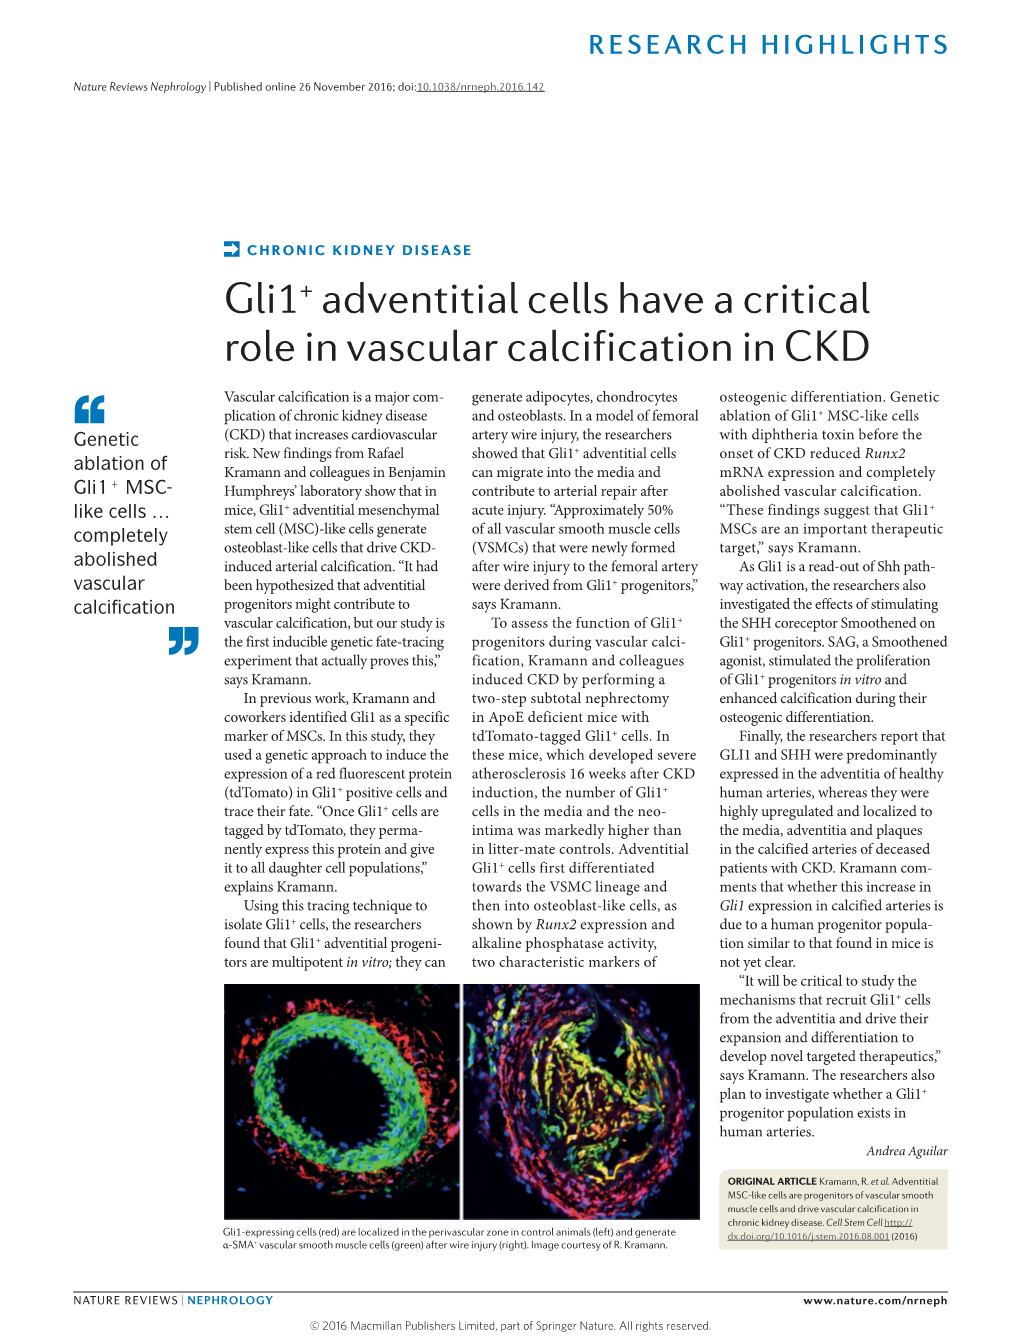 Gli1+ Adventitial Cells Have a Critical Role in Vascular Calcification in CKD